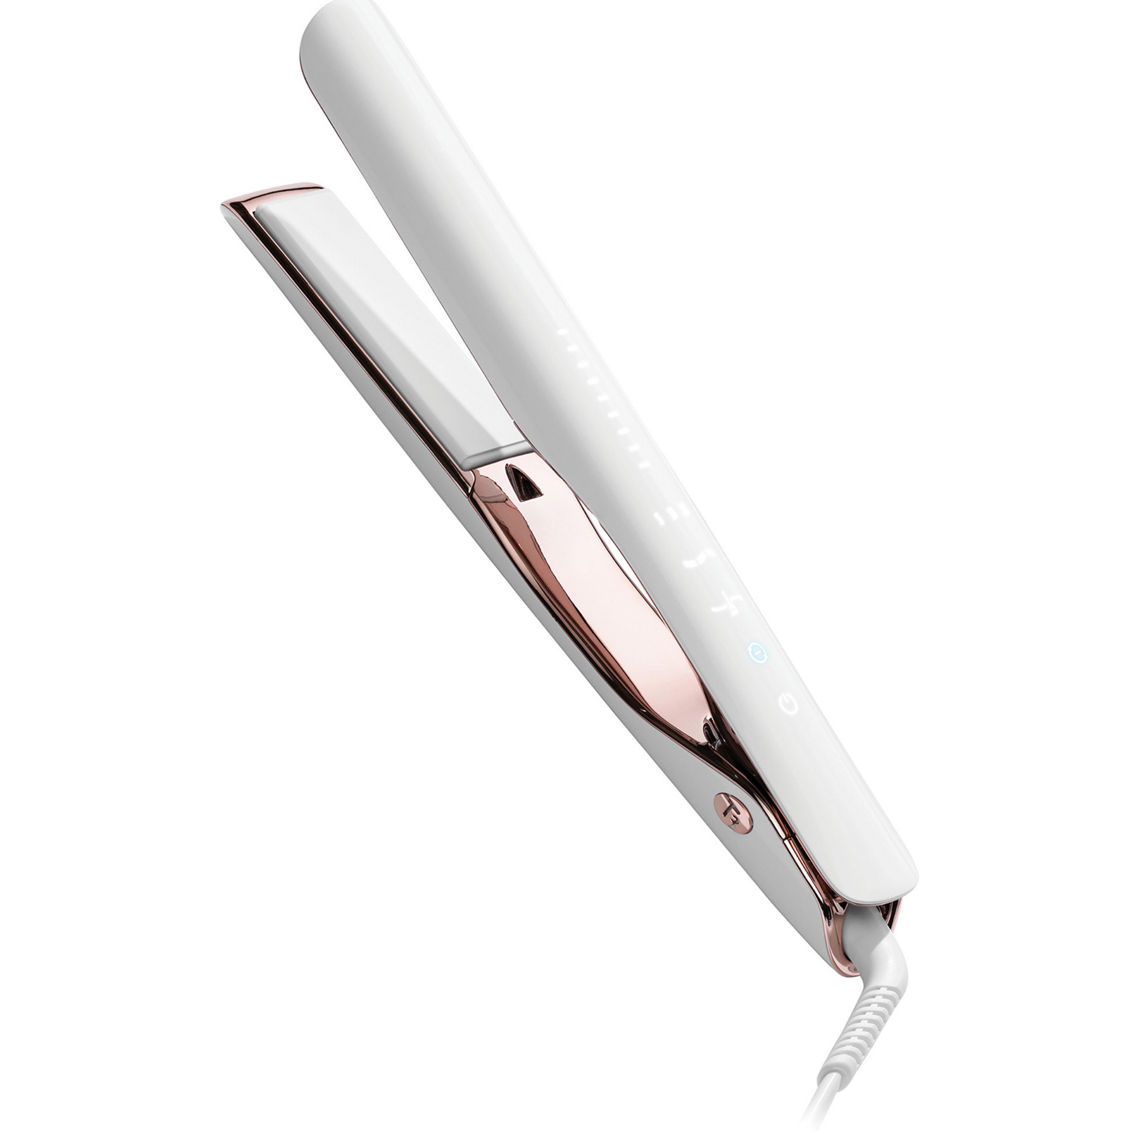 T3 Smooth ID 1 in. Digital Ceramic Smart Flat Iron - Image 2 of 7